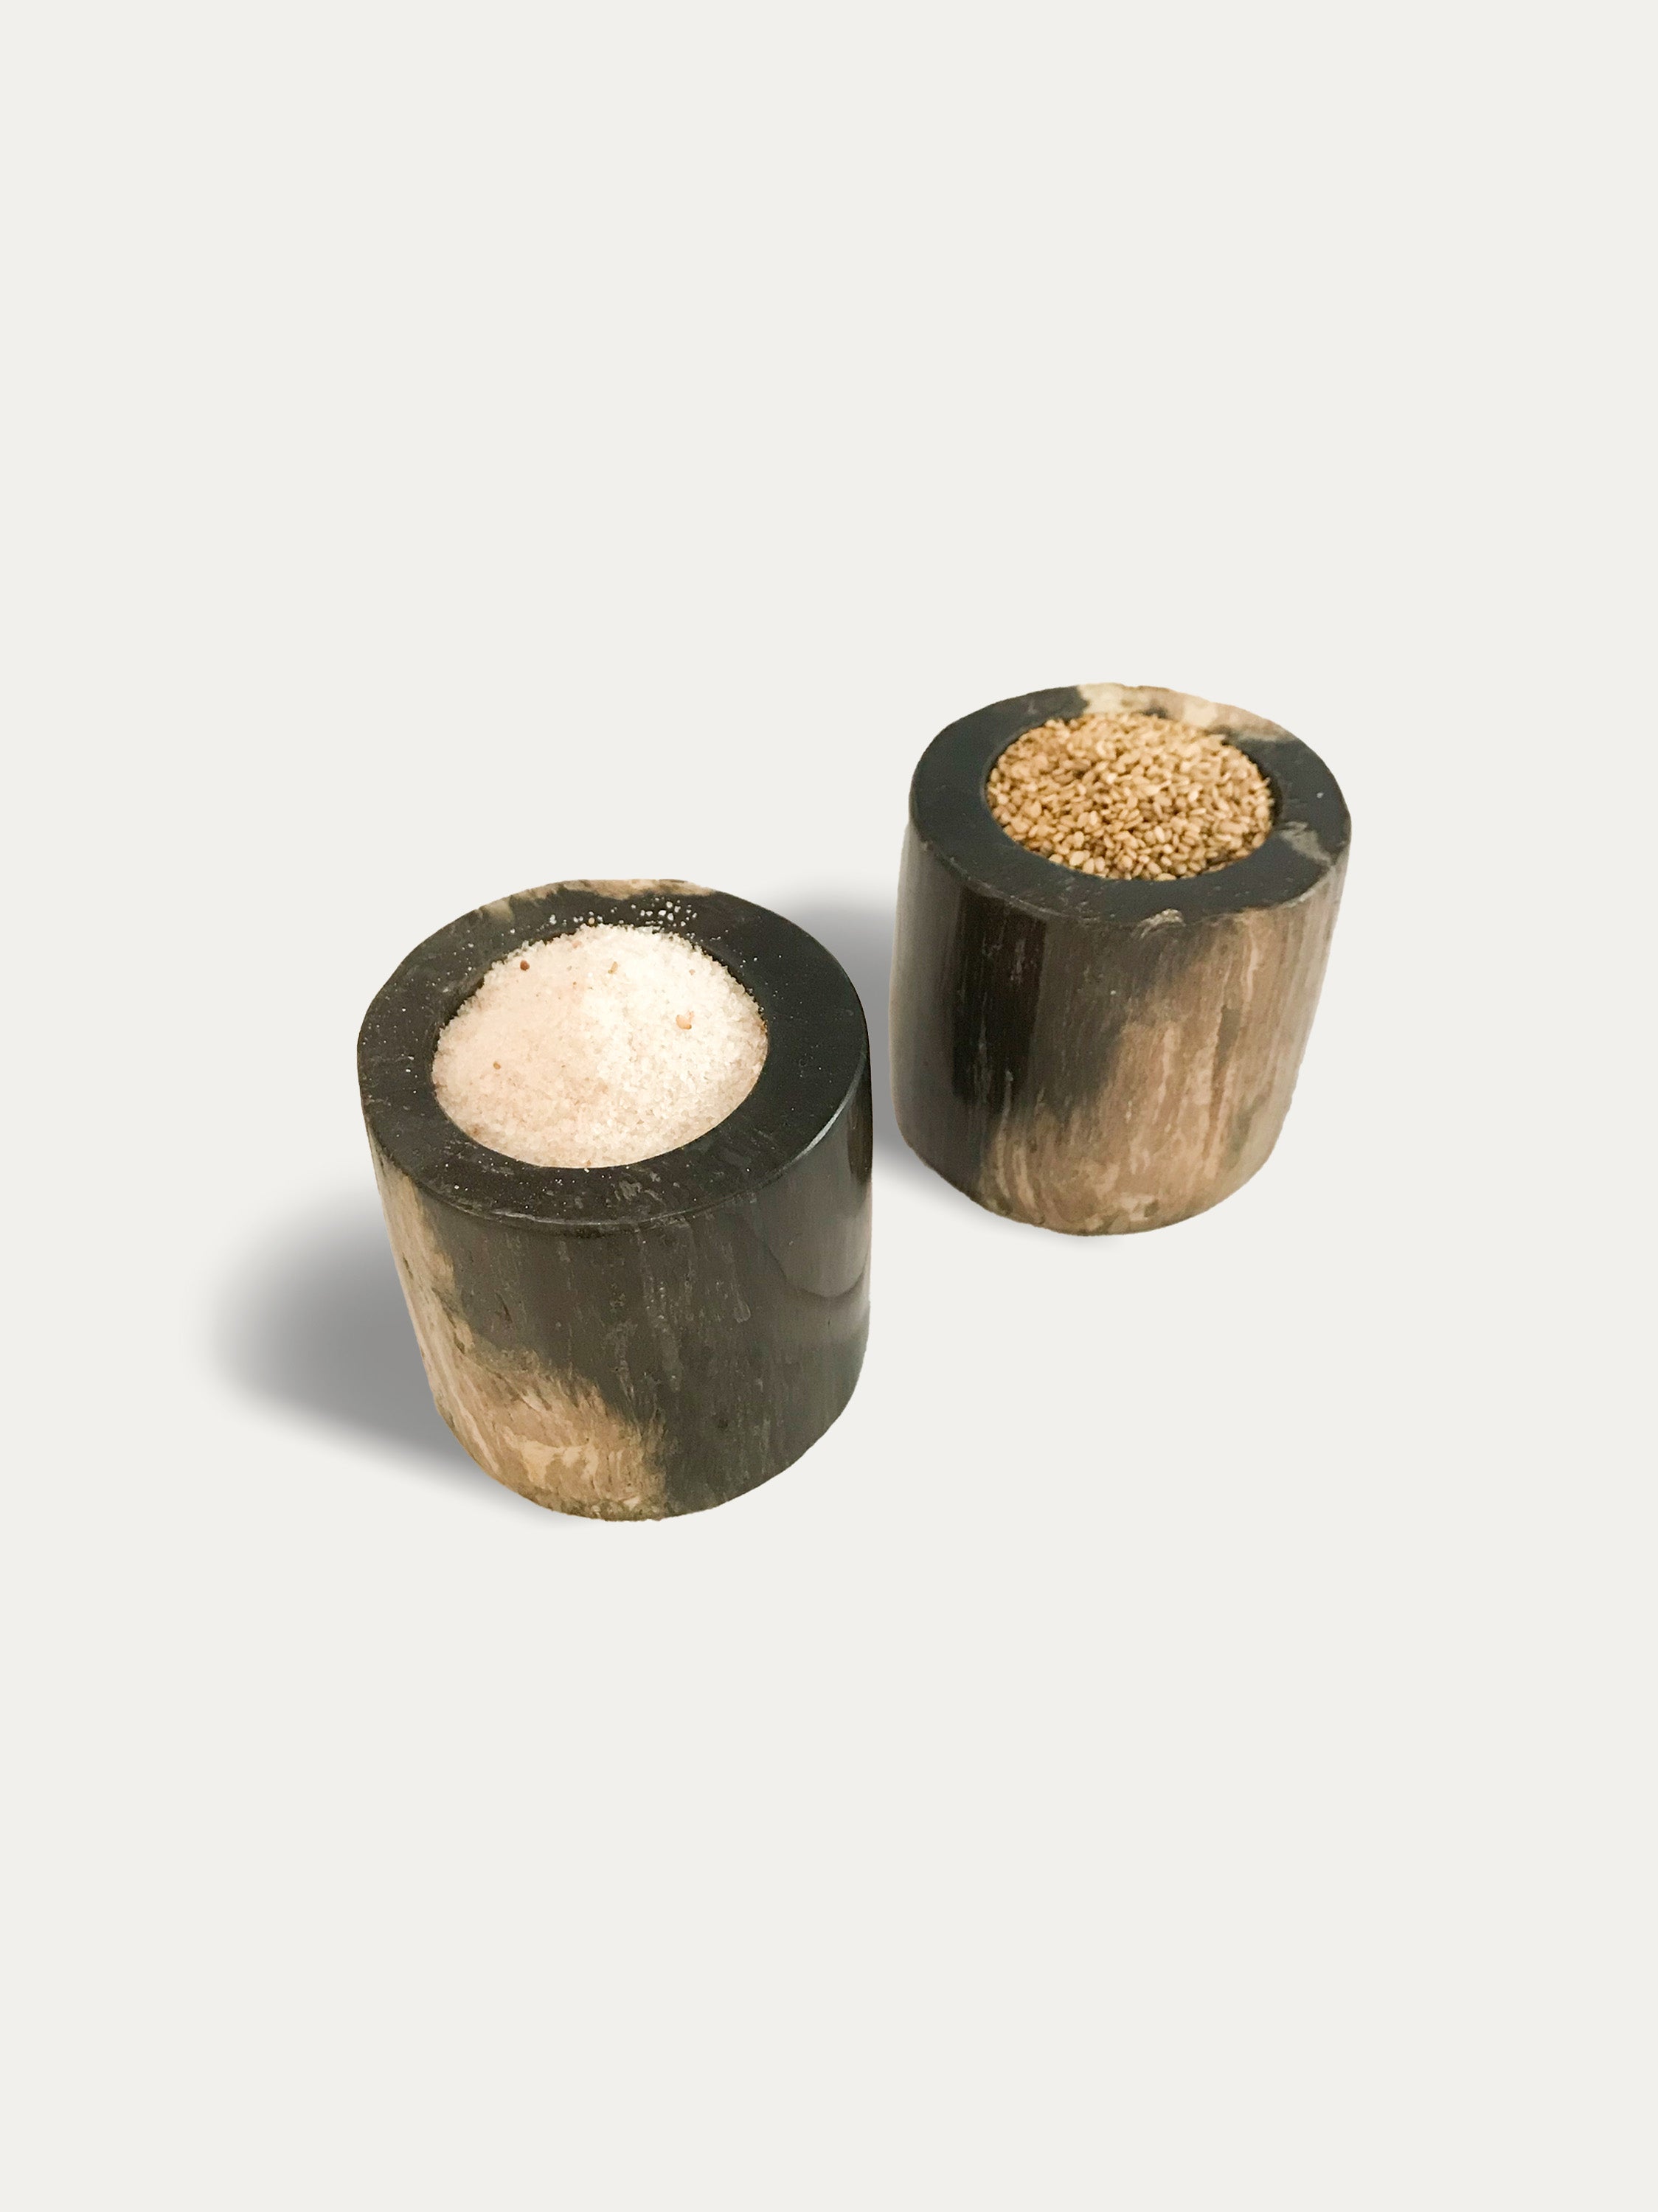 Set of 2 reversible candle/incense holders in petrified wood and assorted balinese incense